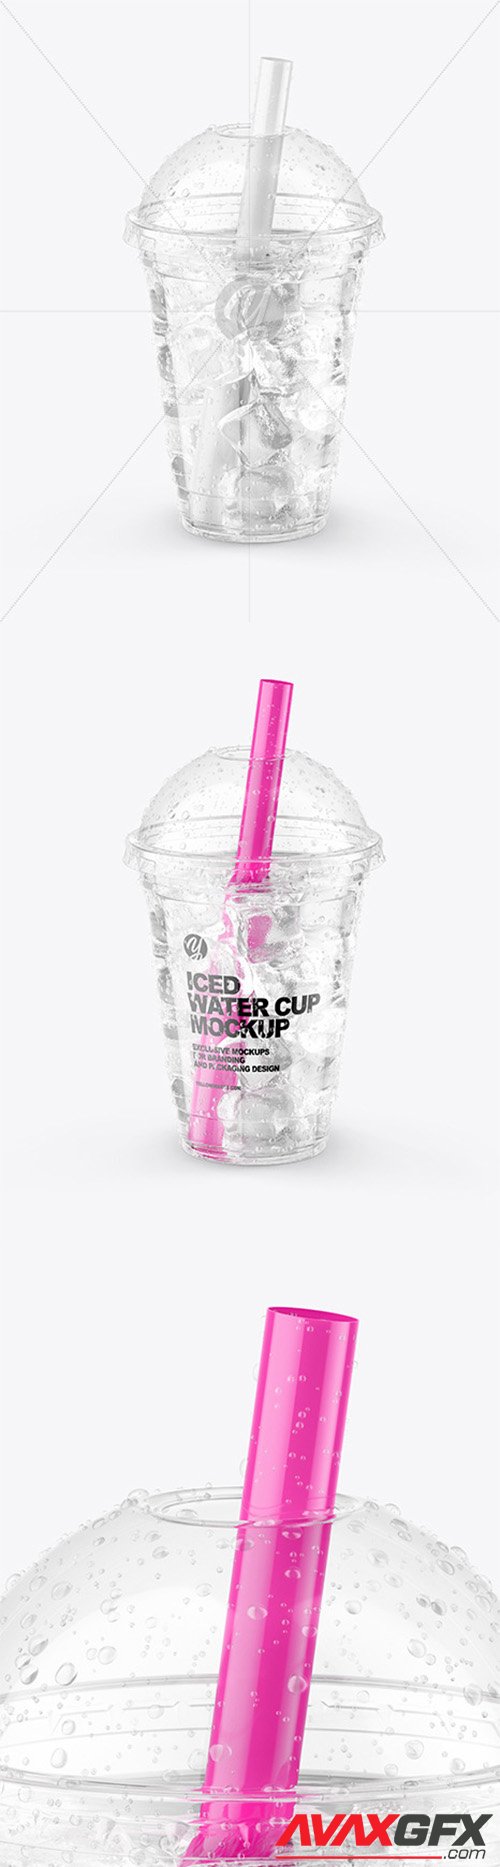 Download 11 Glossy Plastic Soda Cup With Ice Branding Mockups PSD Mockup Templates